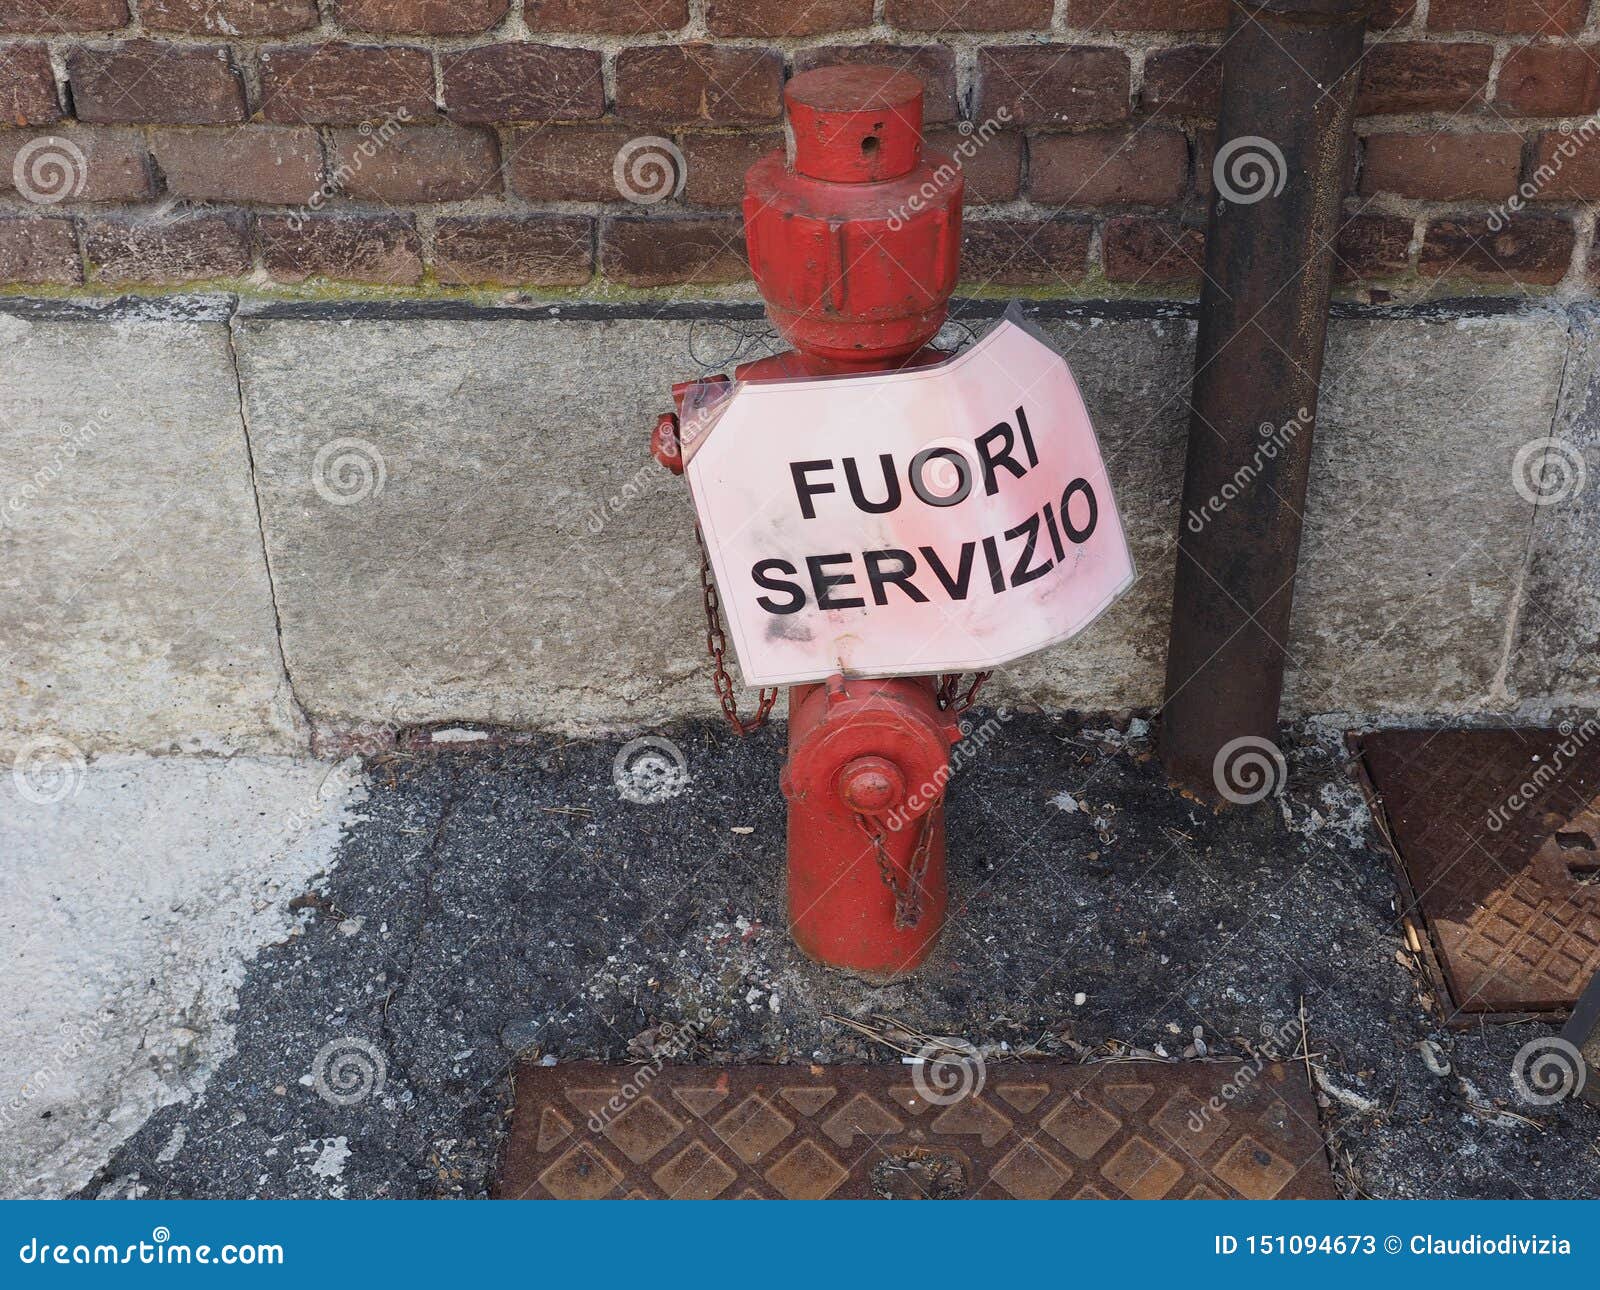 fire hydrant with fuori servizio (out of order) sign